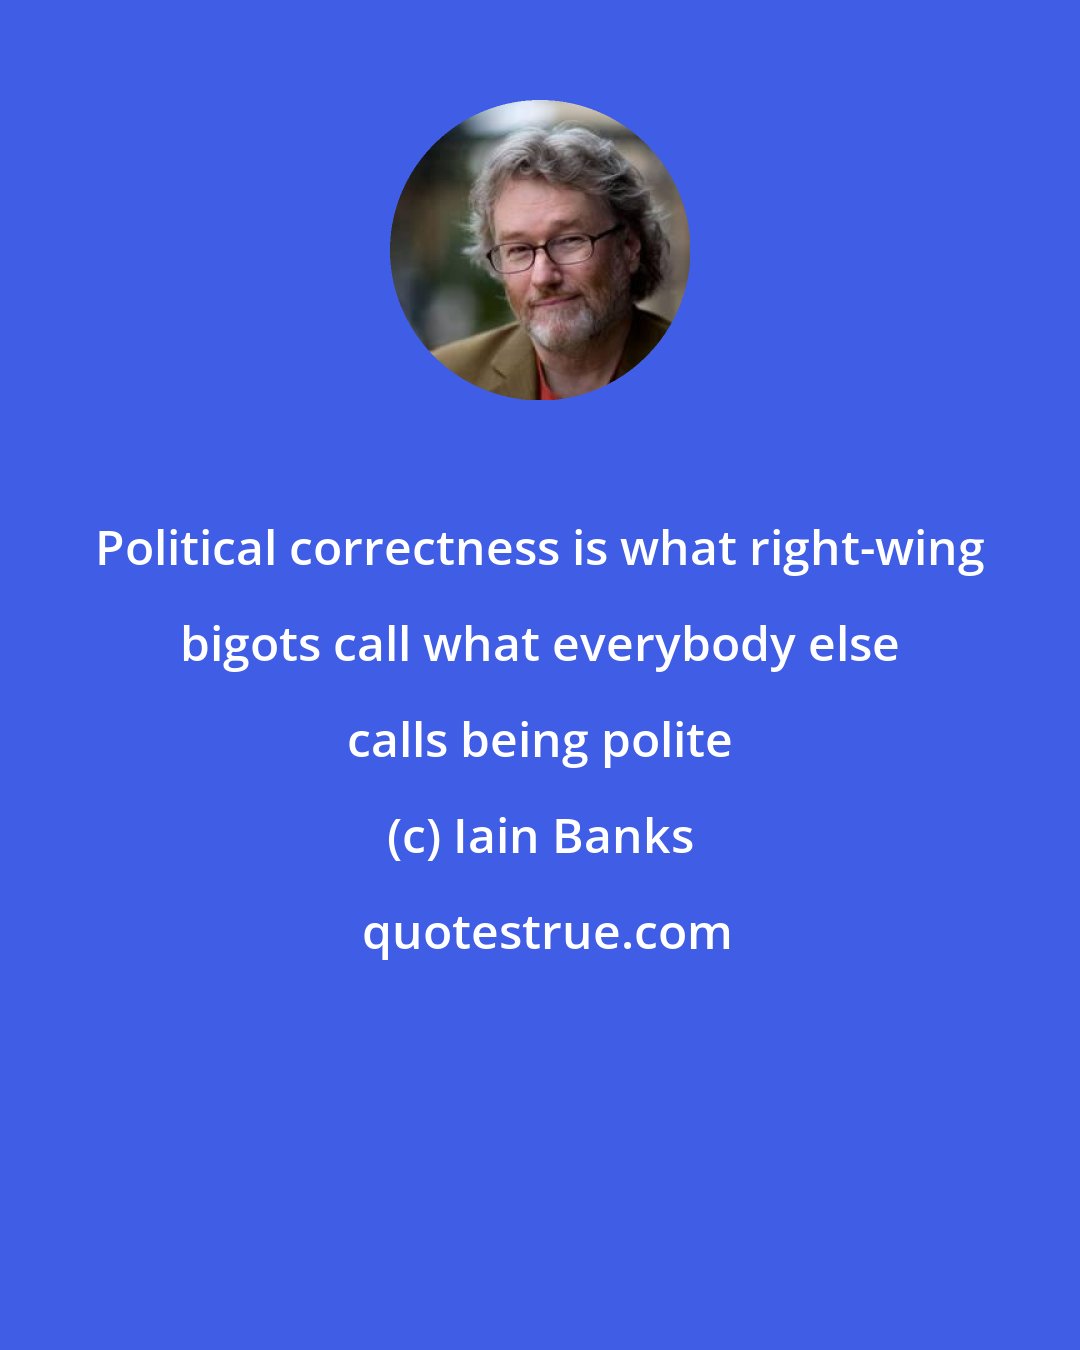 Iain Banks: Political correctness is what right-wing bigots call what everybody else calls being polite